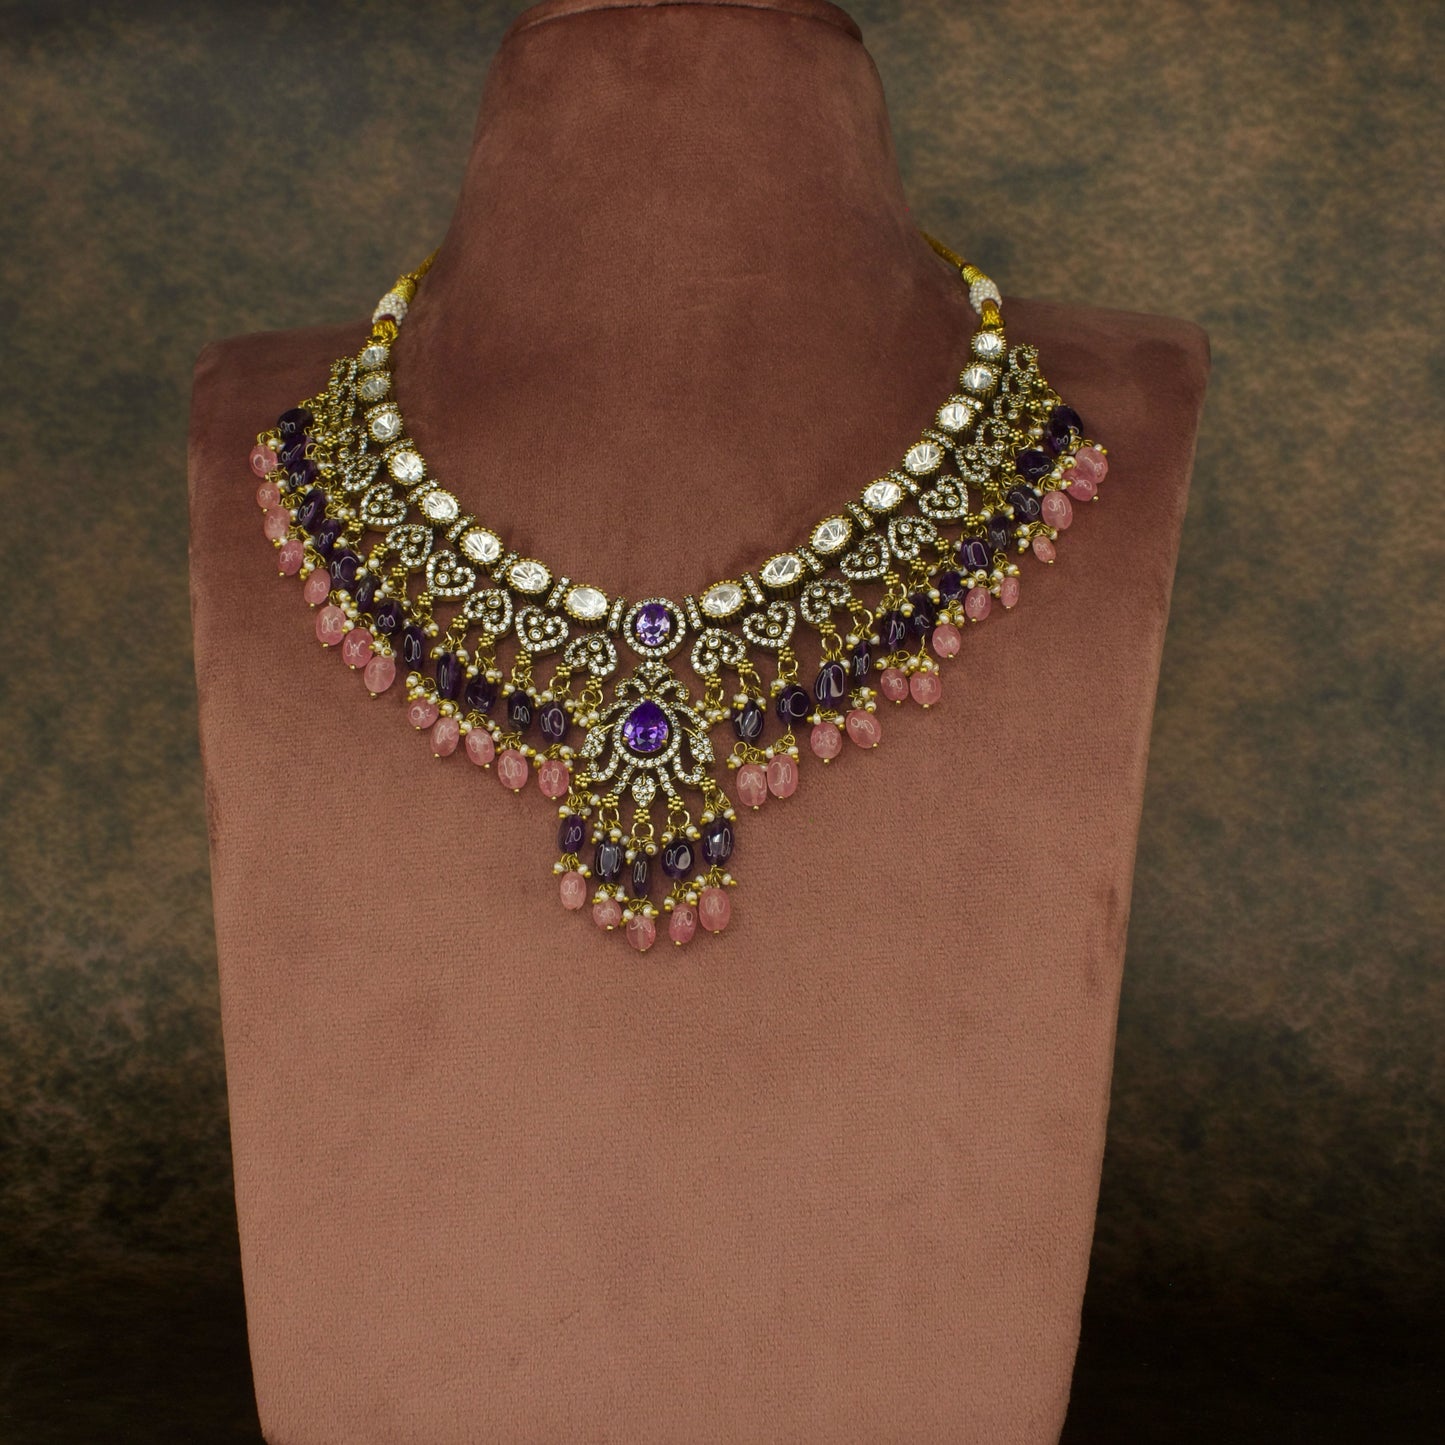 Scintillating Polki Victorian Necklace Set with High Quality Victorian Finish. This product belongs to Victorian Jewellery category